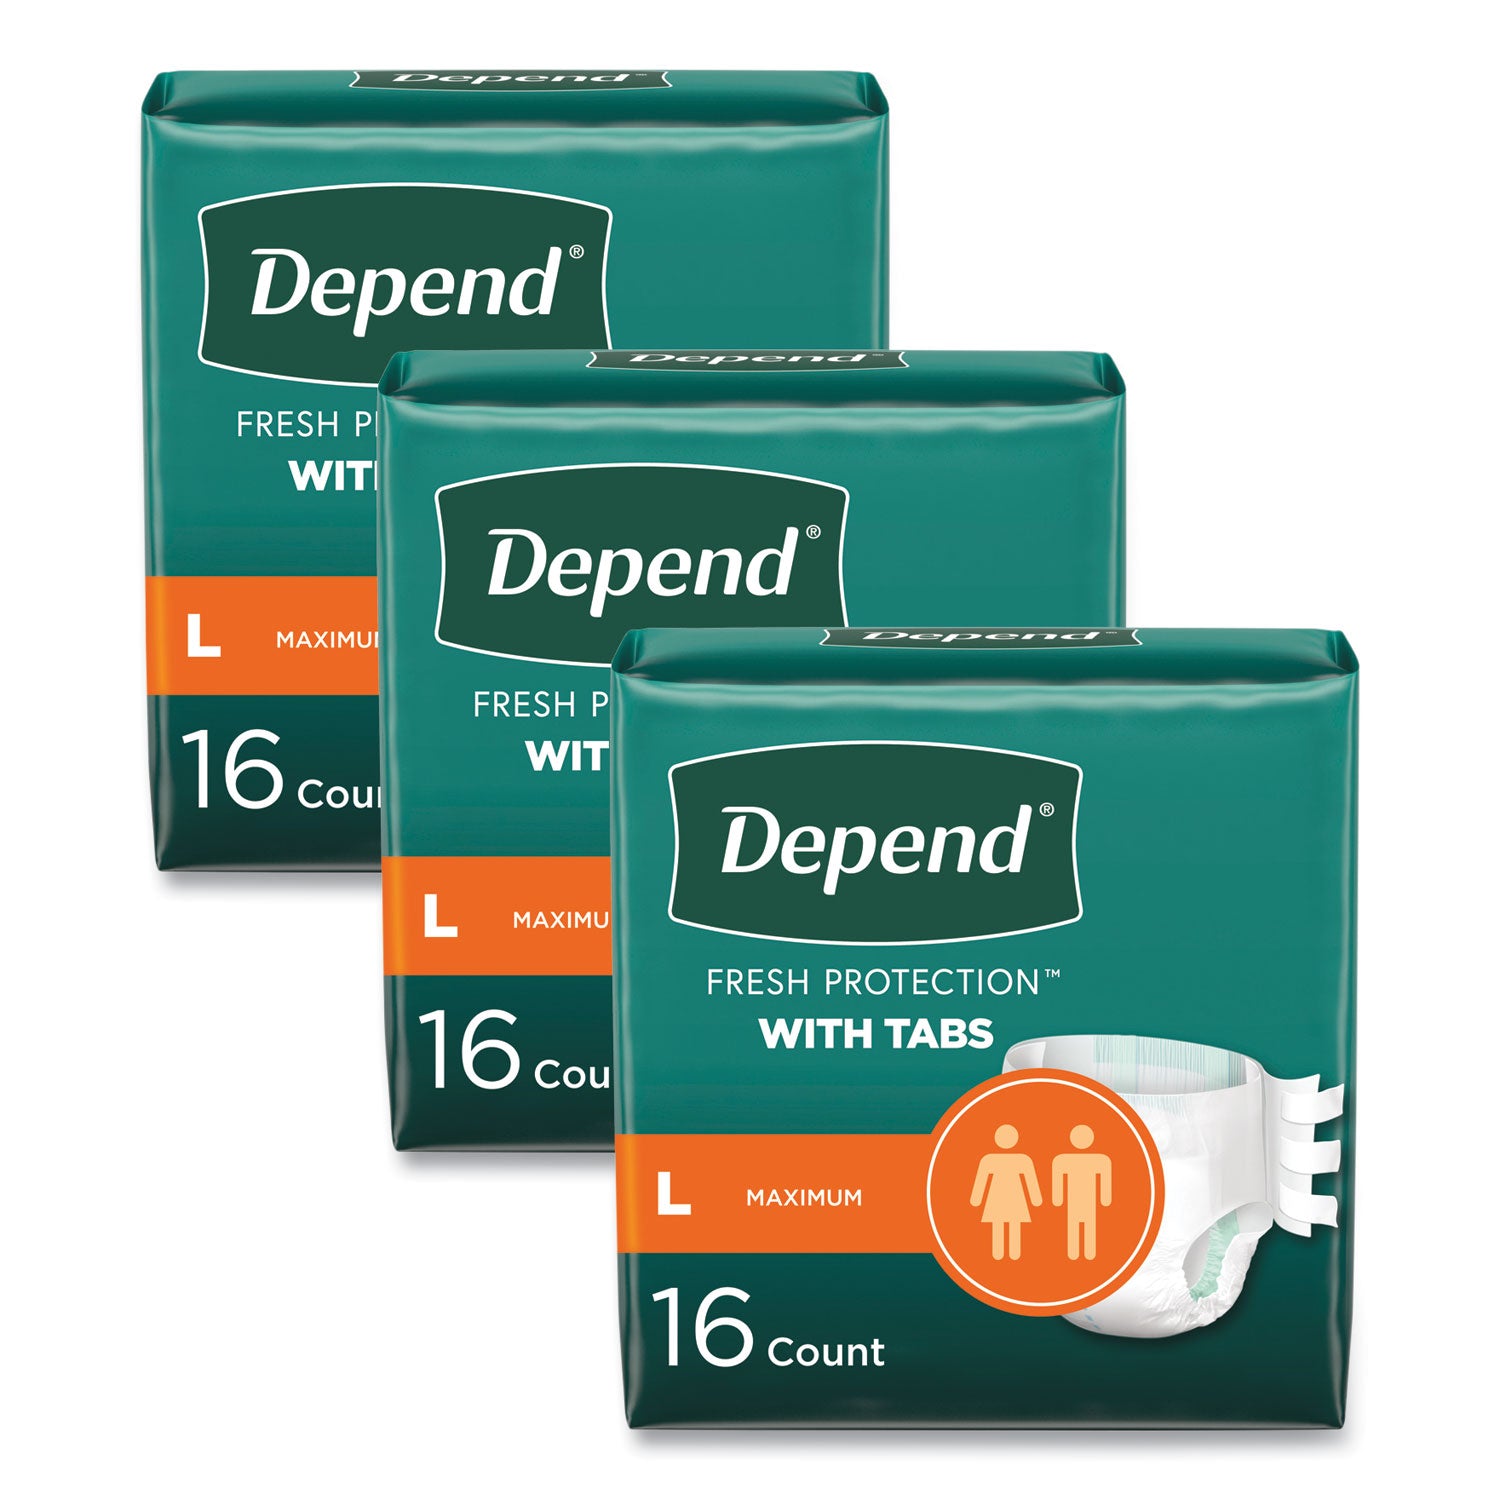 incontinence-protection-with-tabs-35-to-49-waist-16-pack-3-packs-carton_kcc35458 - 1